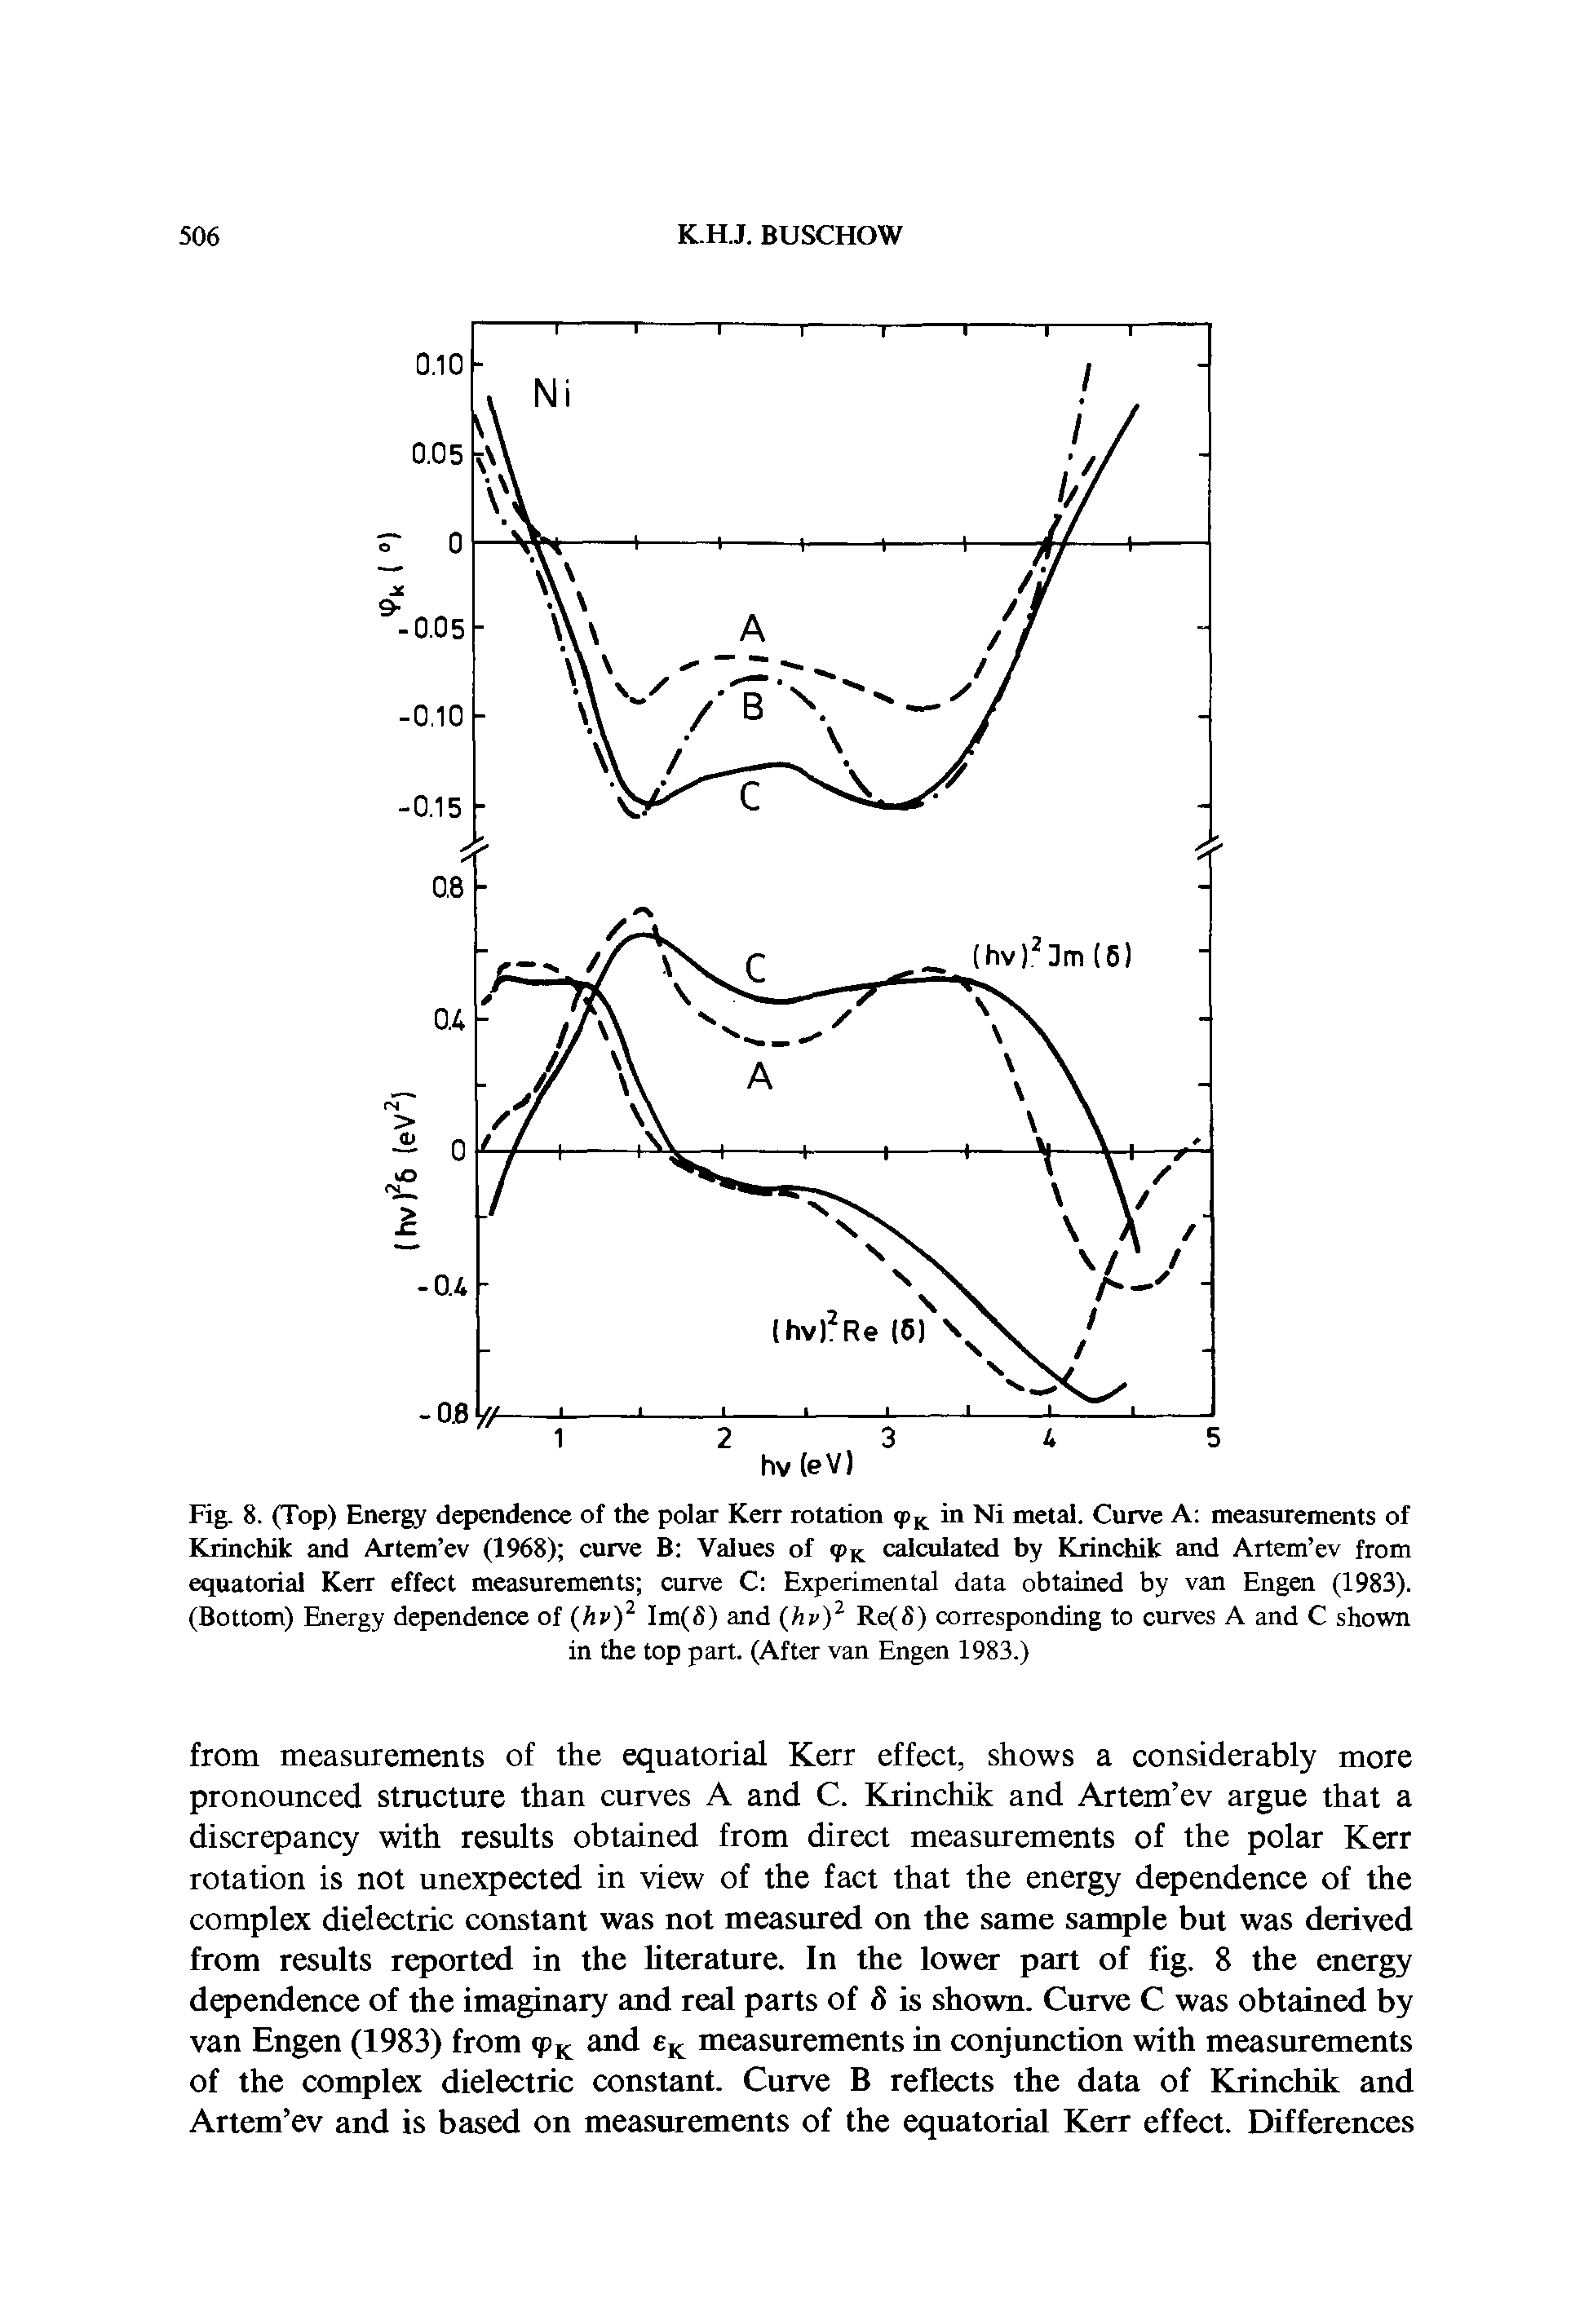 Fig. 8. (Top) Energy dependence of the polar Kerr rotation <pK in Ni metal. Curve A measurements of Krinchik and Artem ev (1968) curve B Values of <pK calculated by Krinchik and Artem ev from equatorial Kerr effect measurements curve C Experimental data obtained by van Engen (1983). (Bottom) Energy dependence of (hv)2 Im(S) and (hv)1 Re(S) corresponding to curves A and C shown...